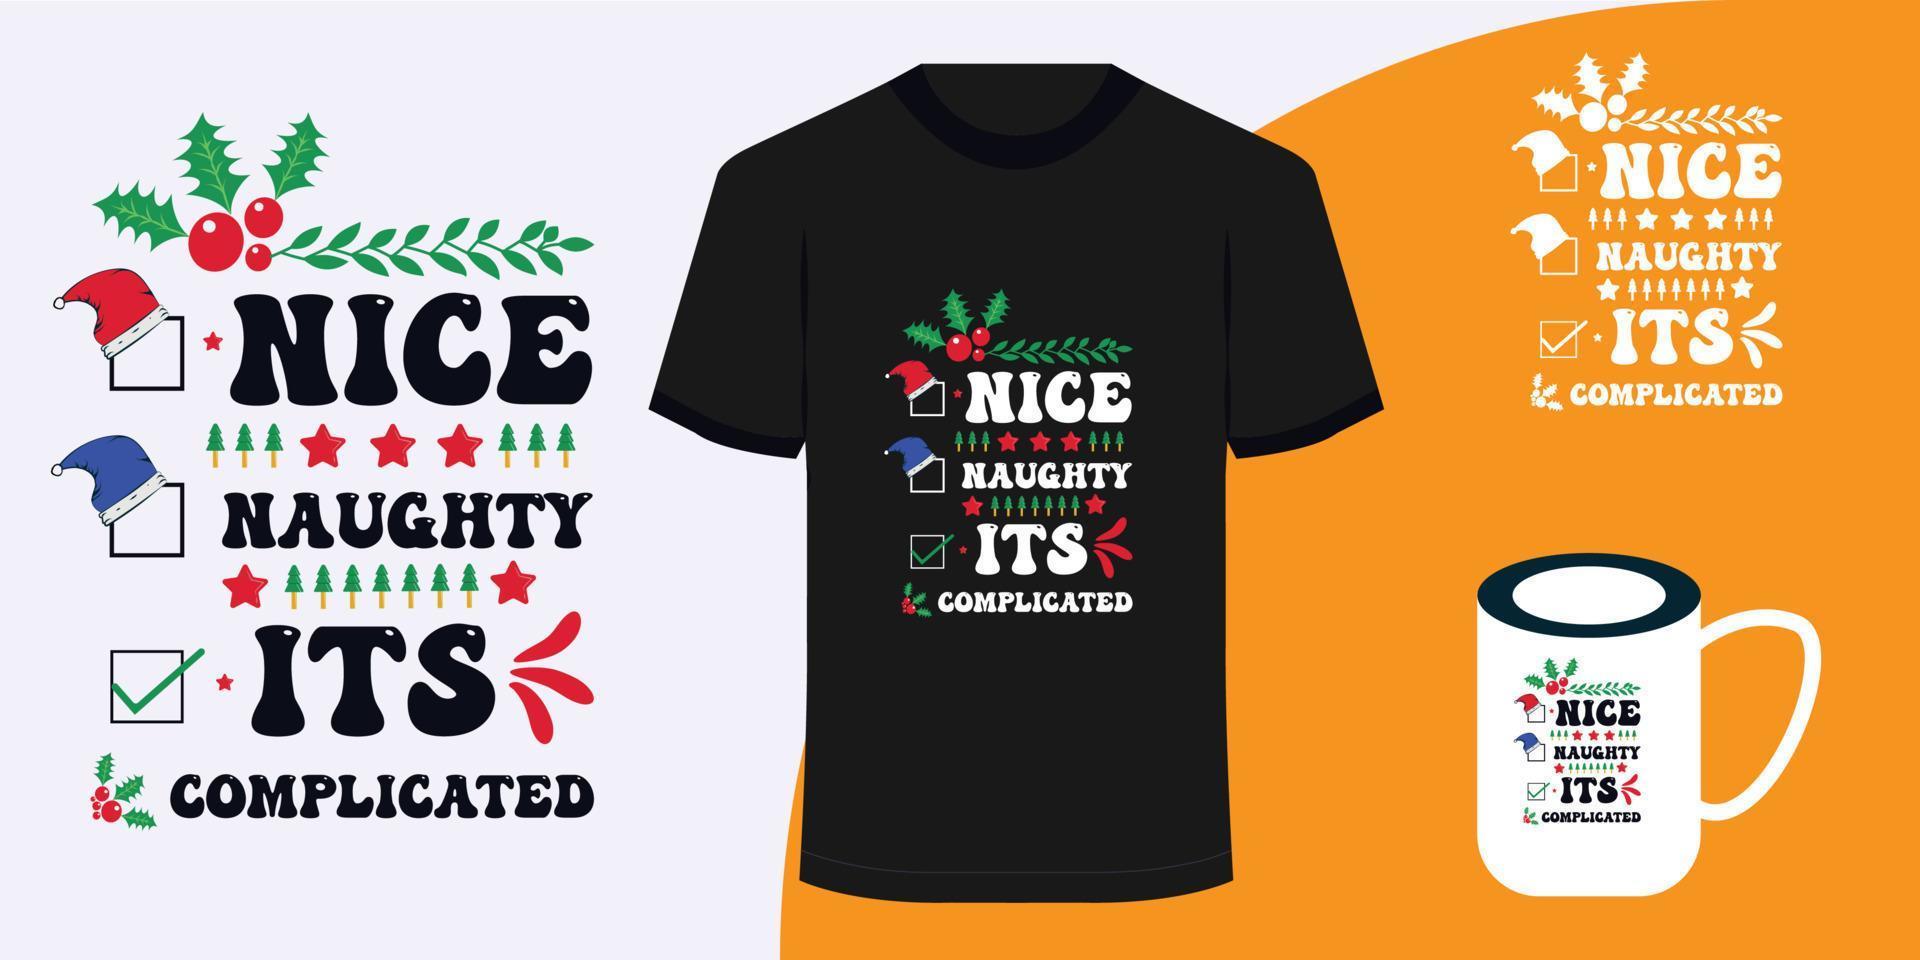 Nice naughty its complicated  Christmas poster and t shirt design vector